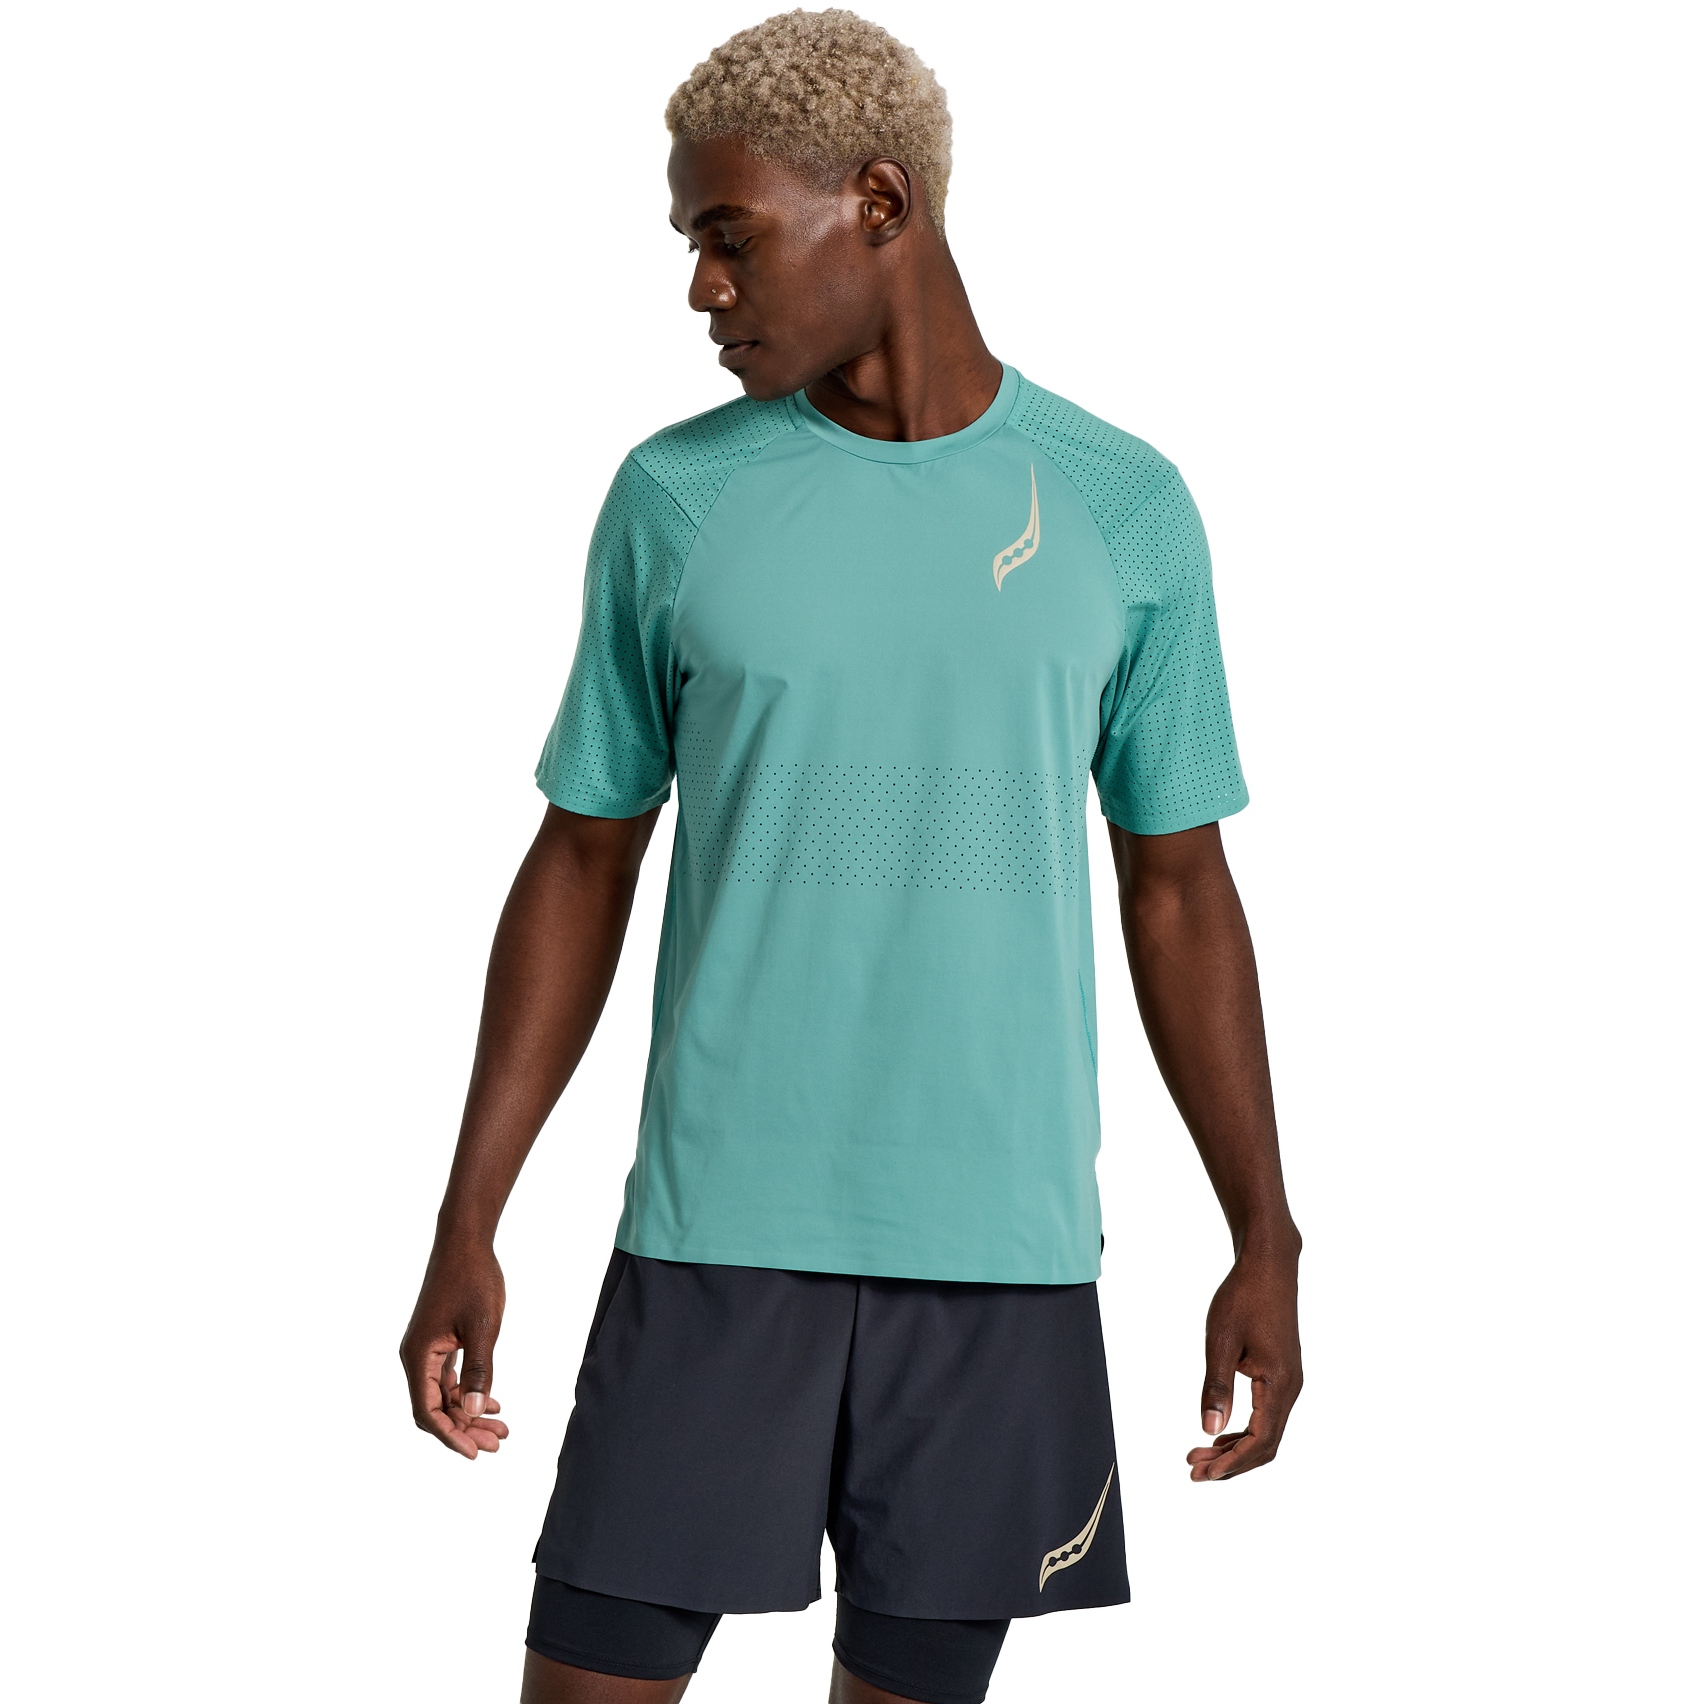 Picture of Saucony Pinnacle Short Sleeve Shirt - moss